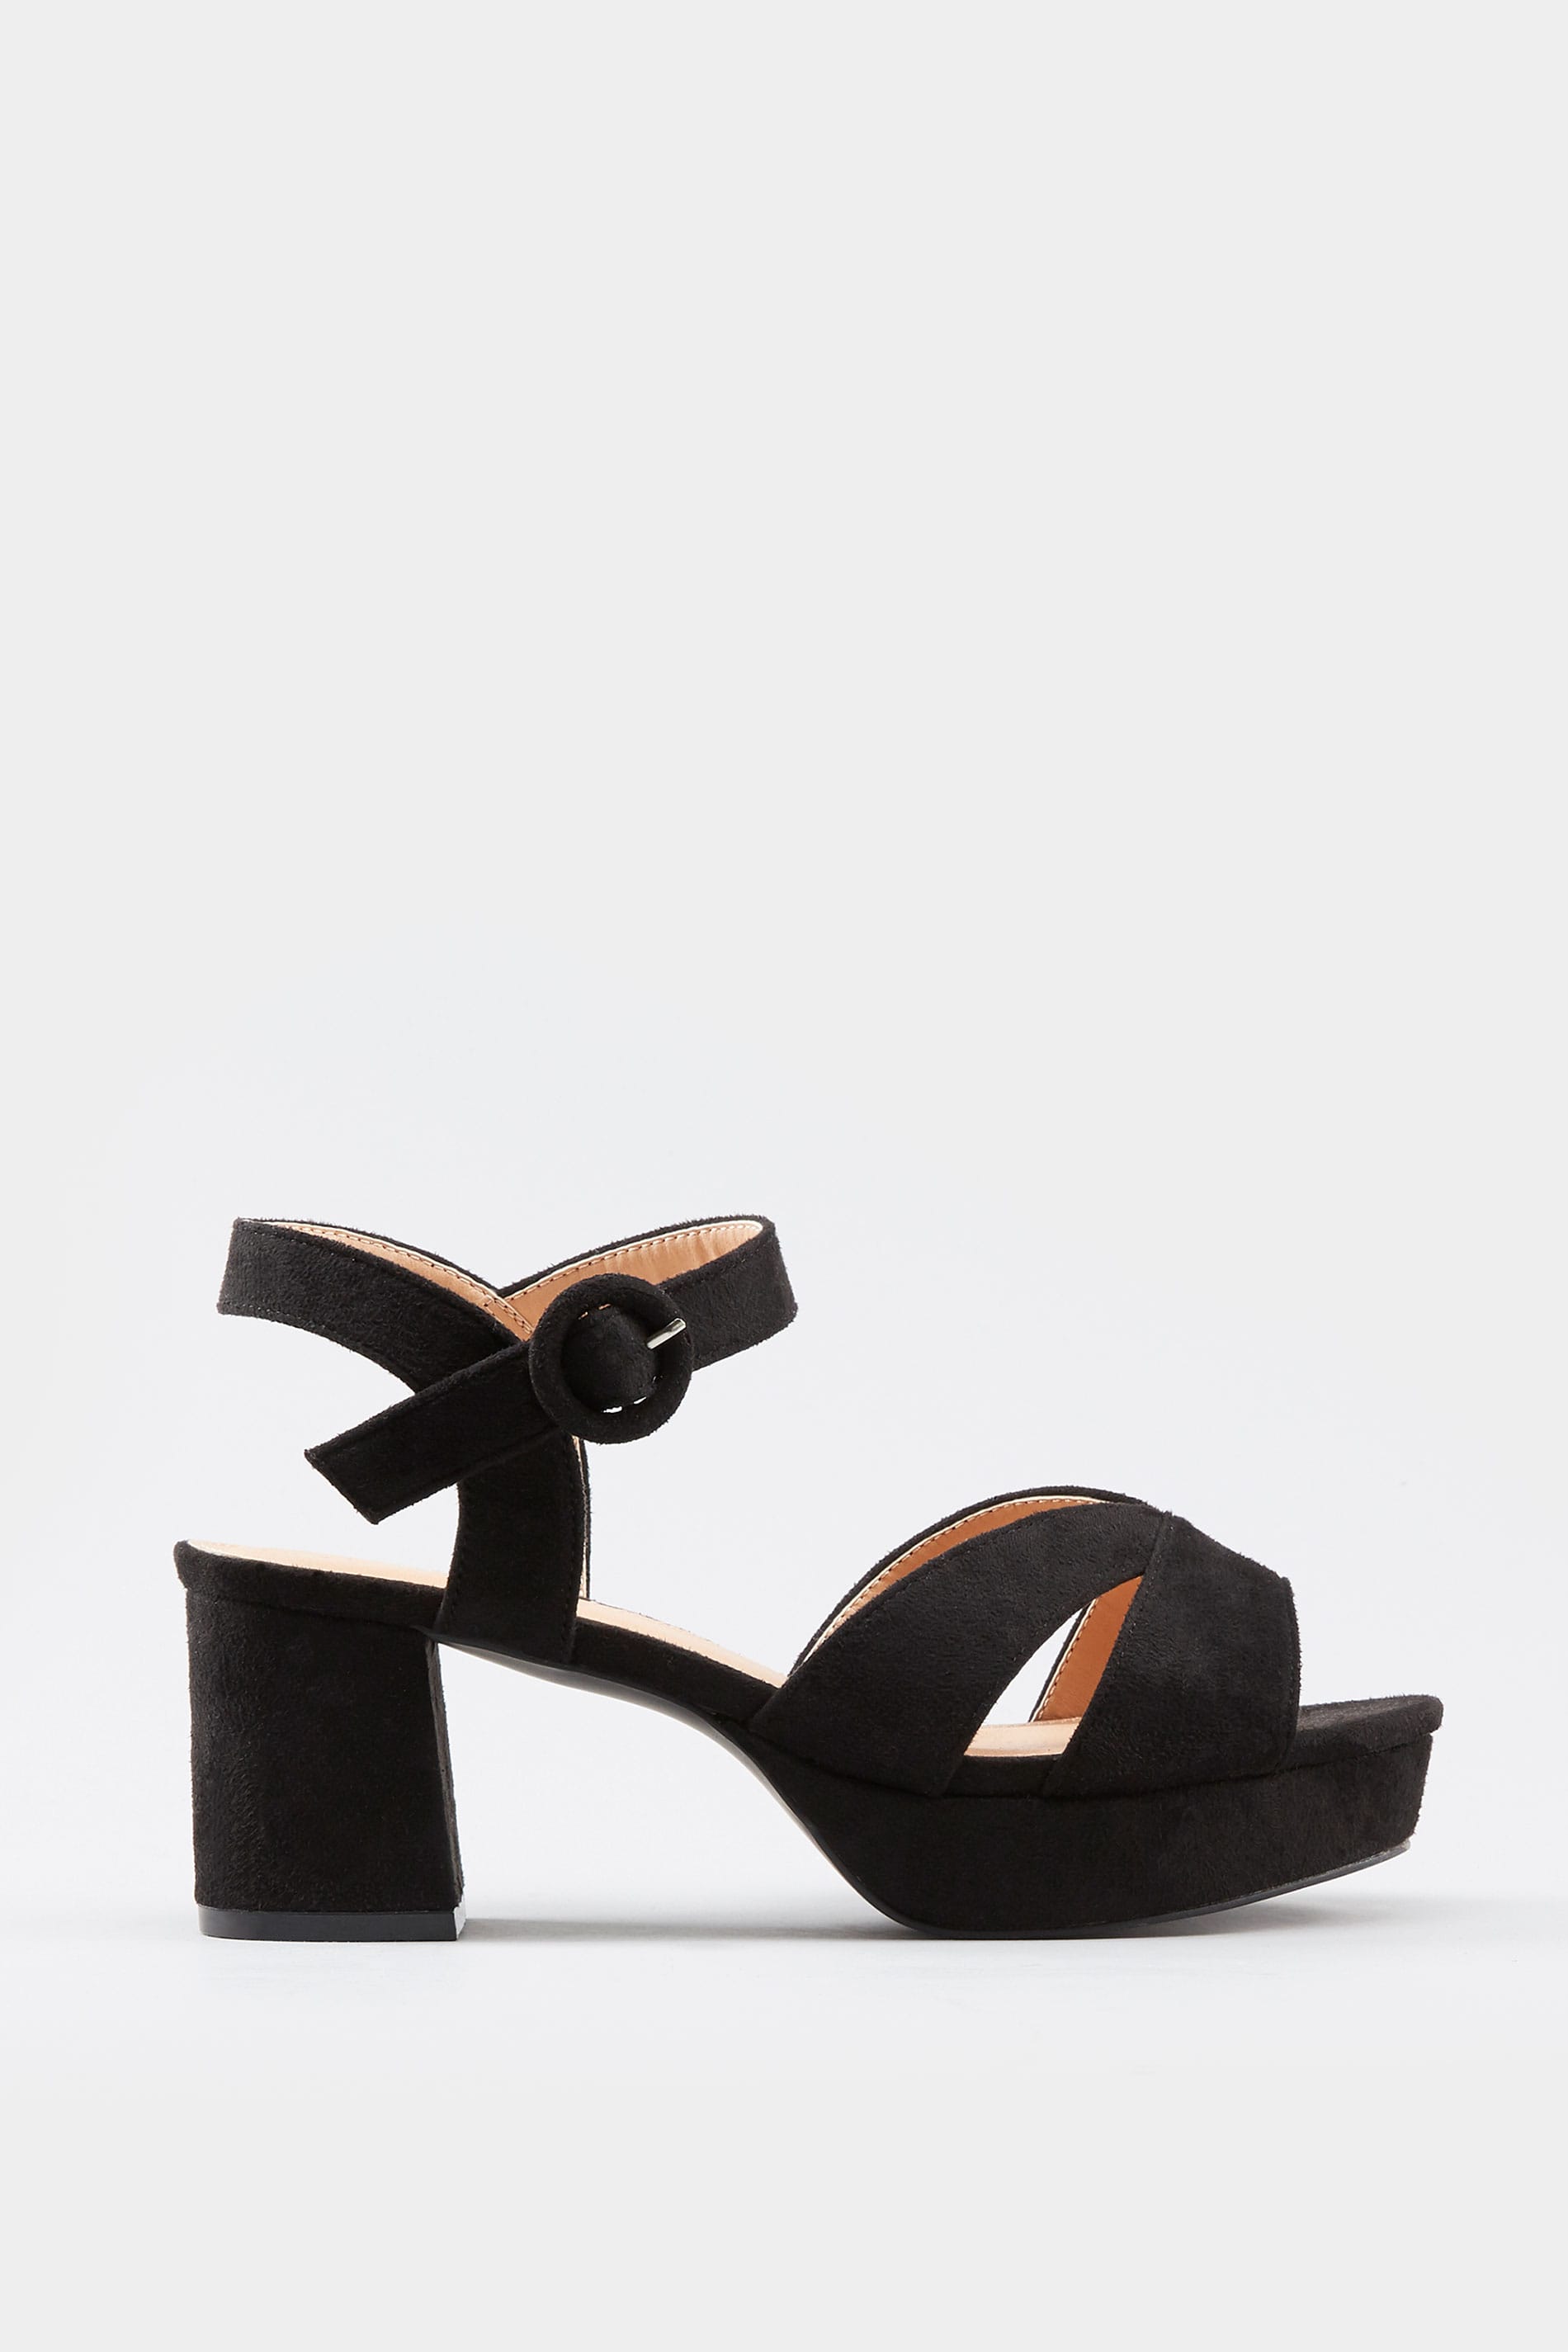 Black Platform Heeled Sandals In Extra Wide Fit | Yours Clothing